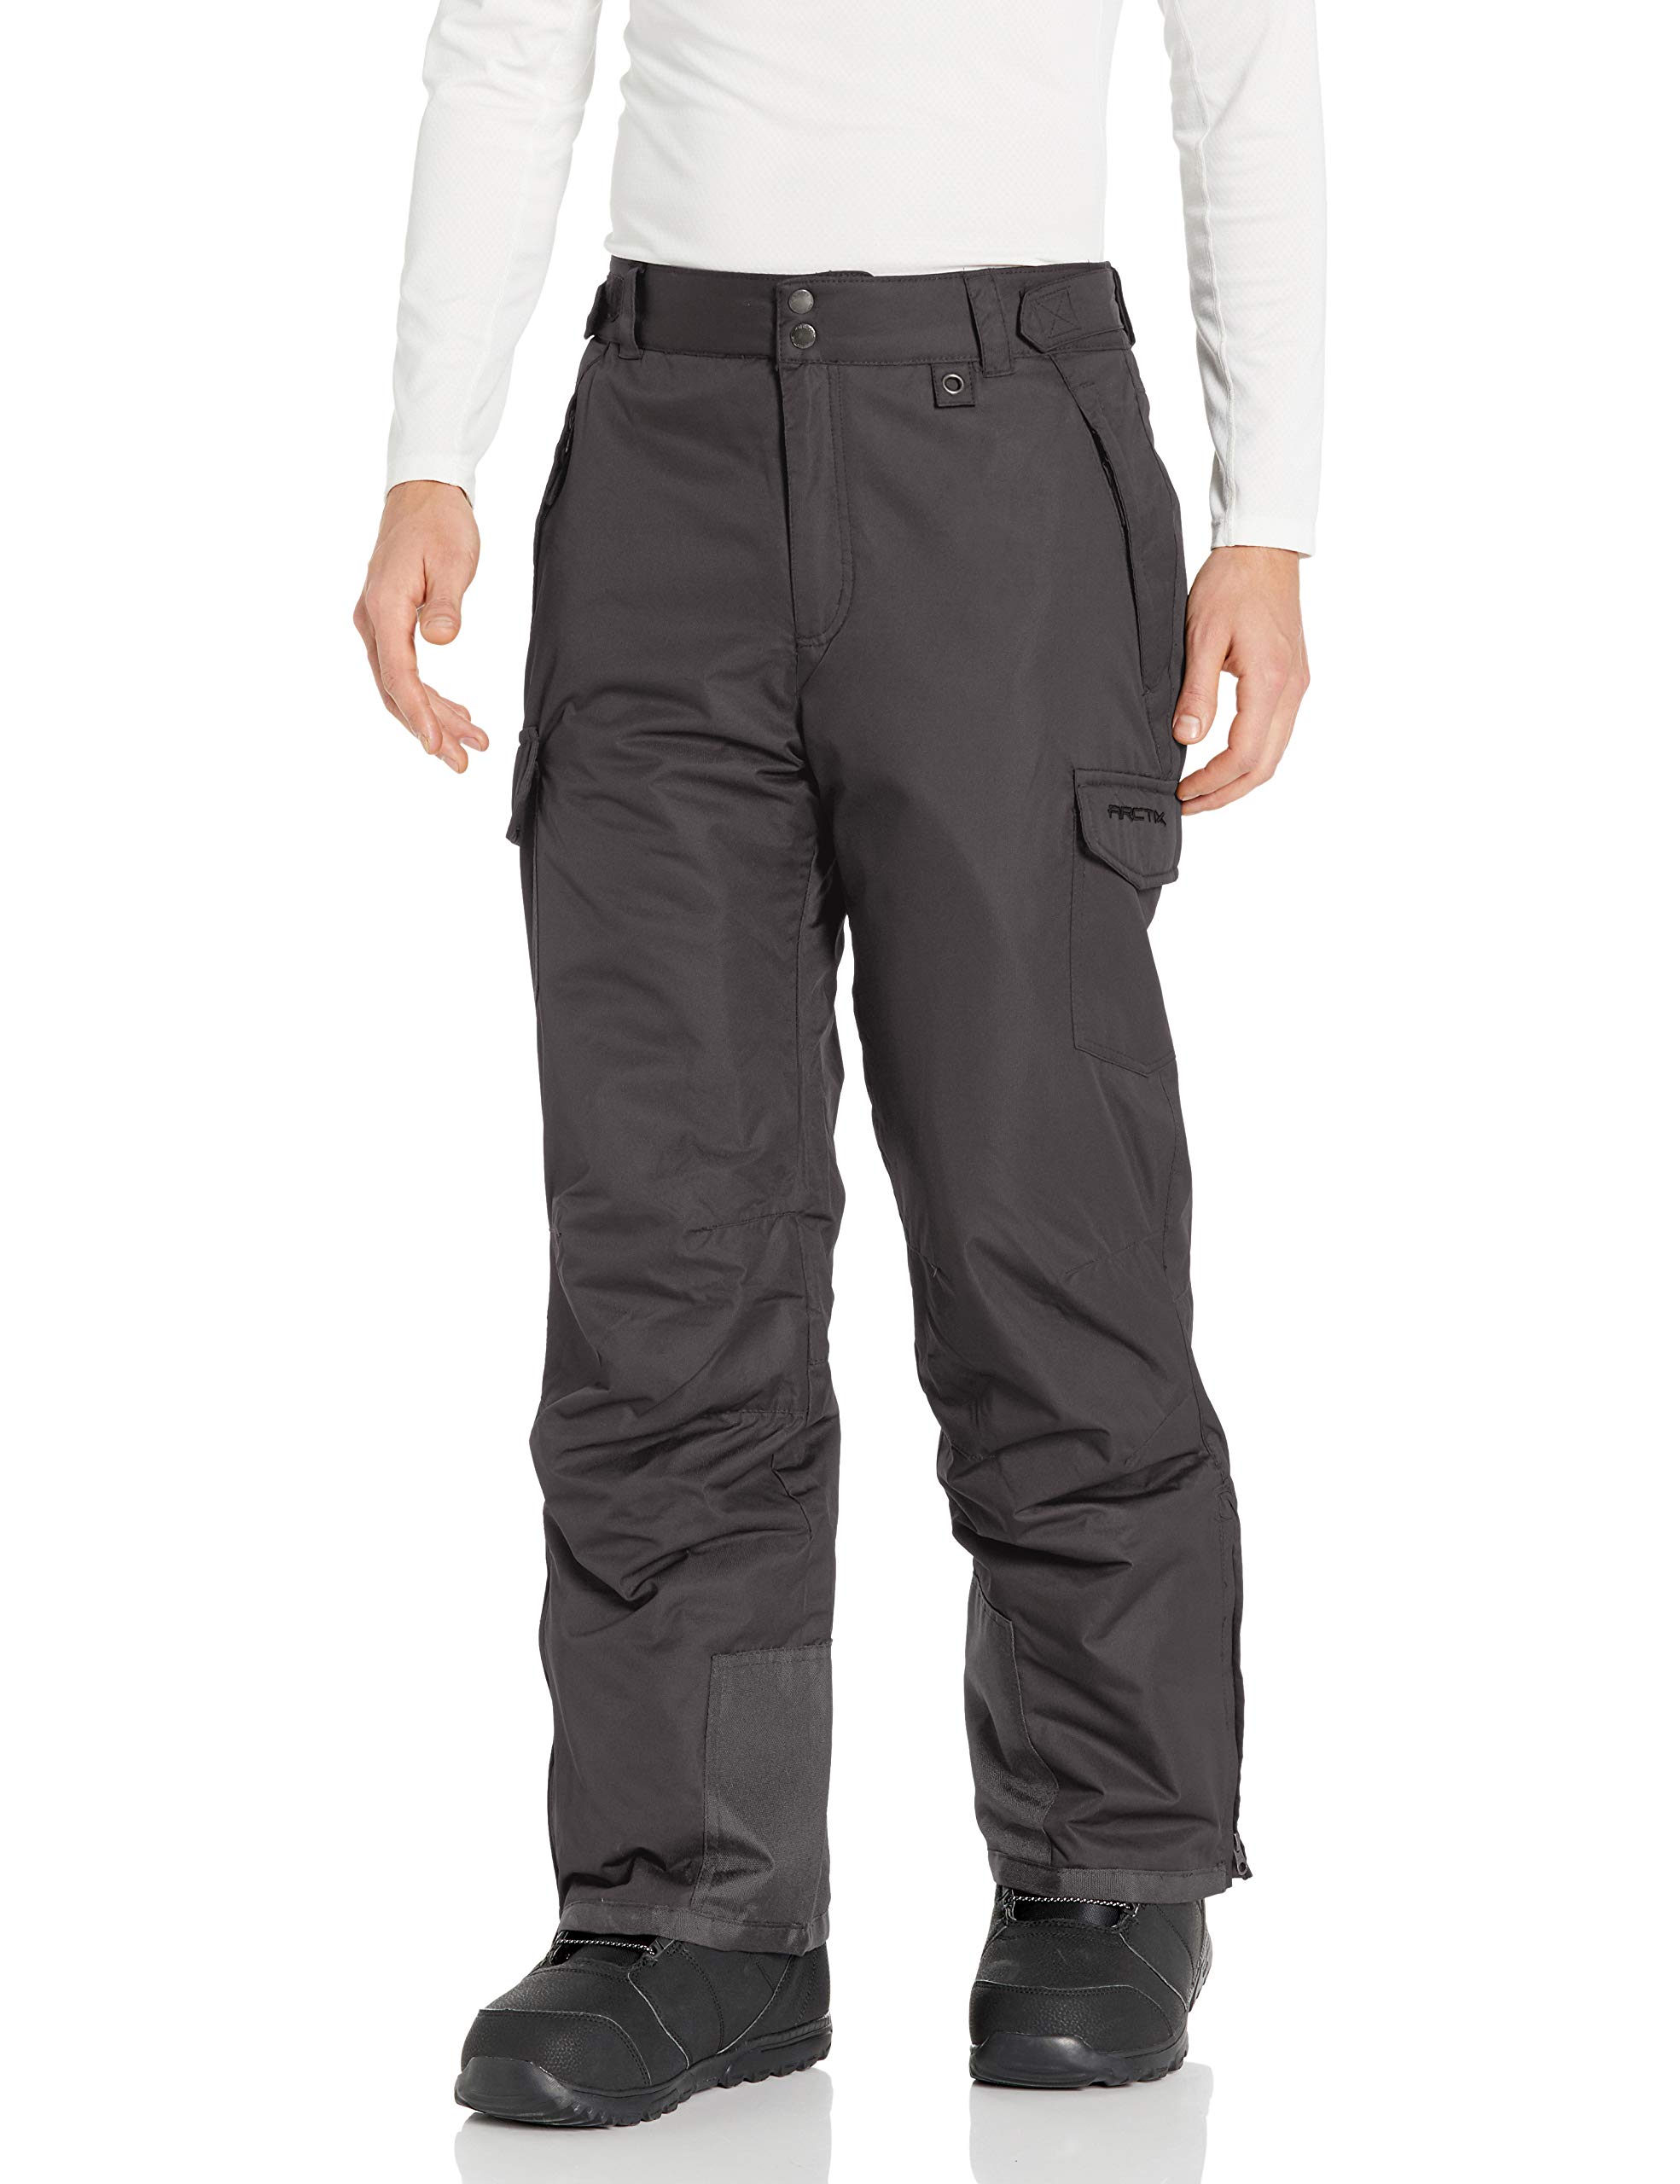 SkiGear mens Snow Sports Cargo Pants Charcoal X-Large/34 Inseam